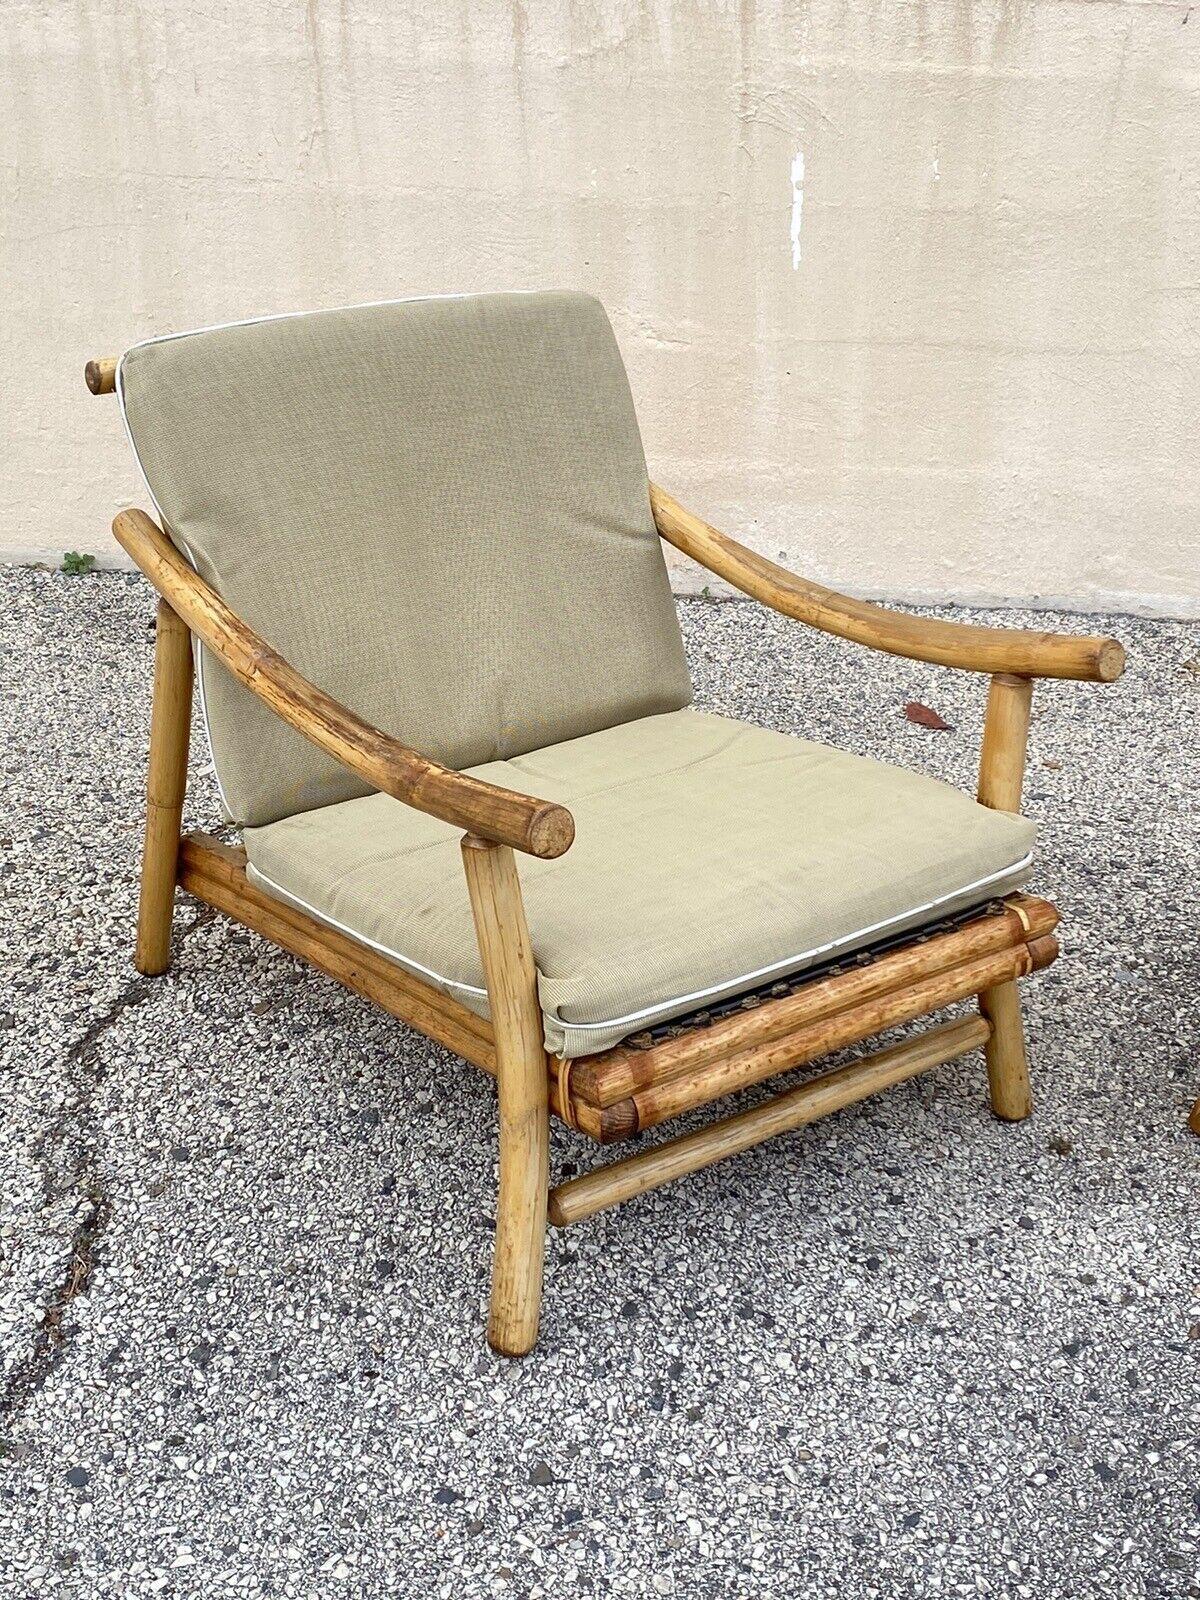 Vintage Ficks Reed Bamboo Rattan Tiki Sofa Set with Lounge Chairs - 3 Pc Set For Sale 3